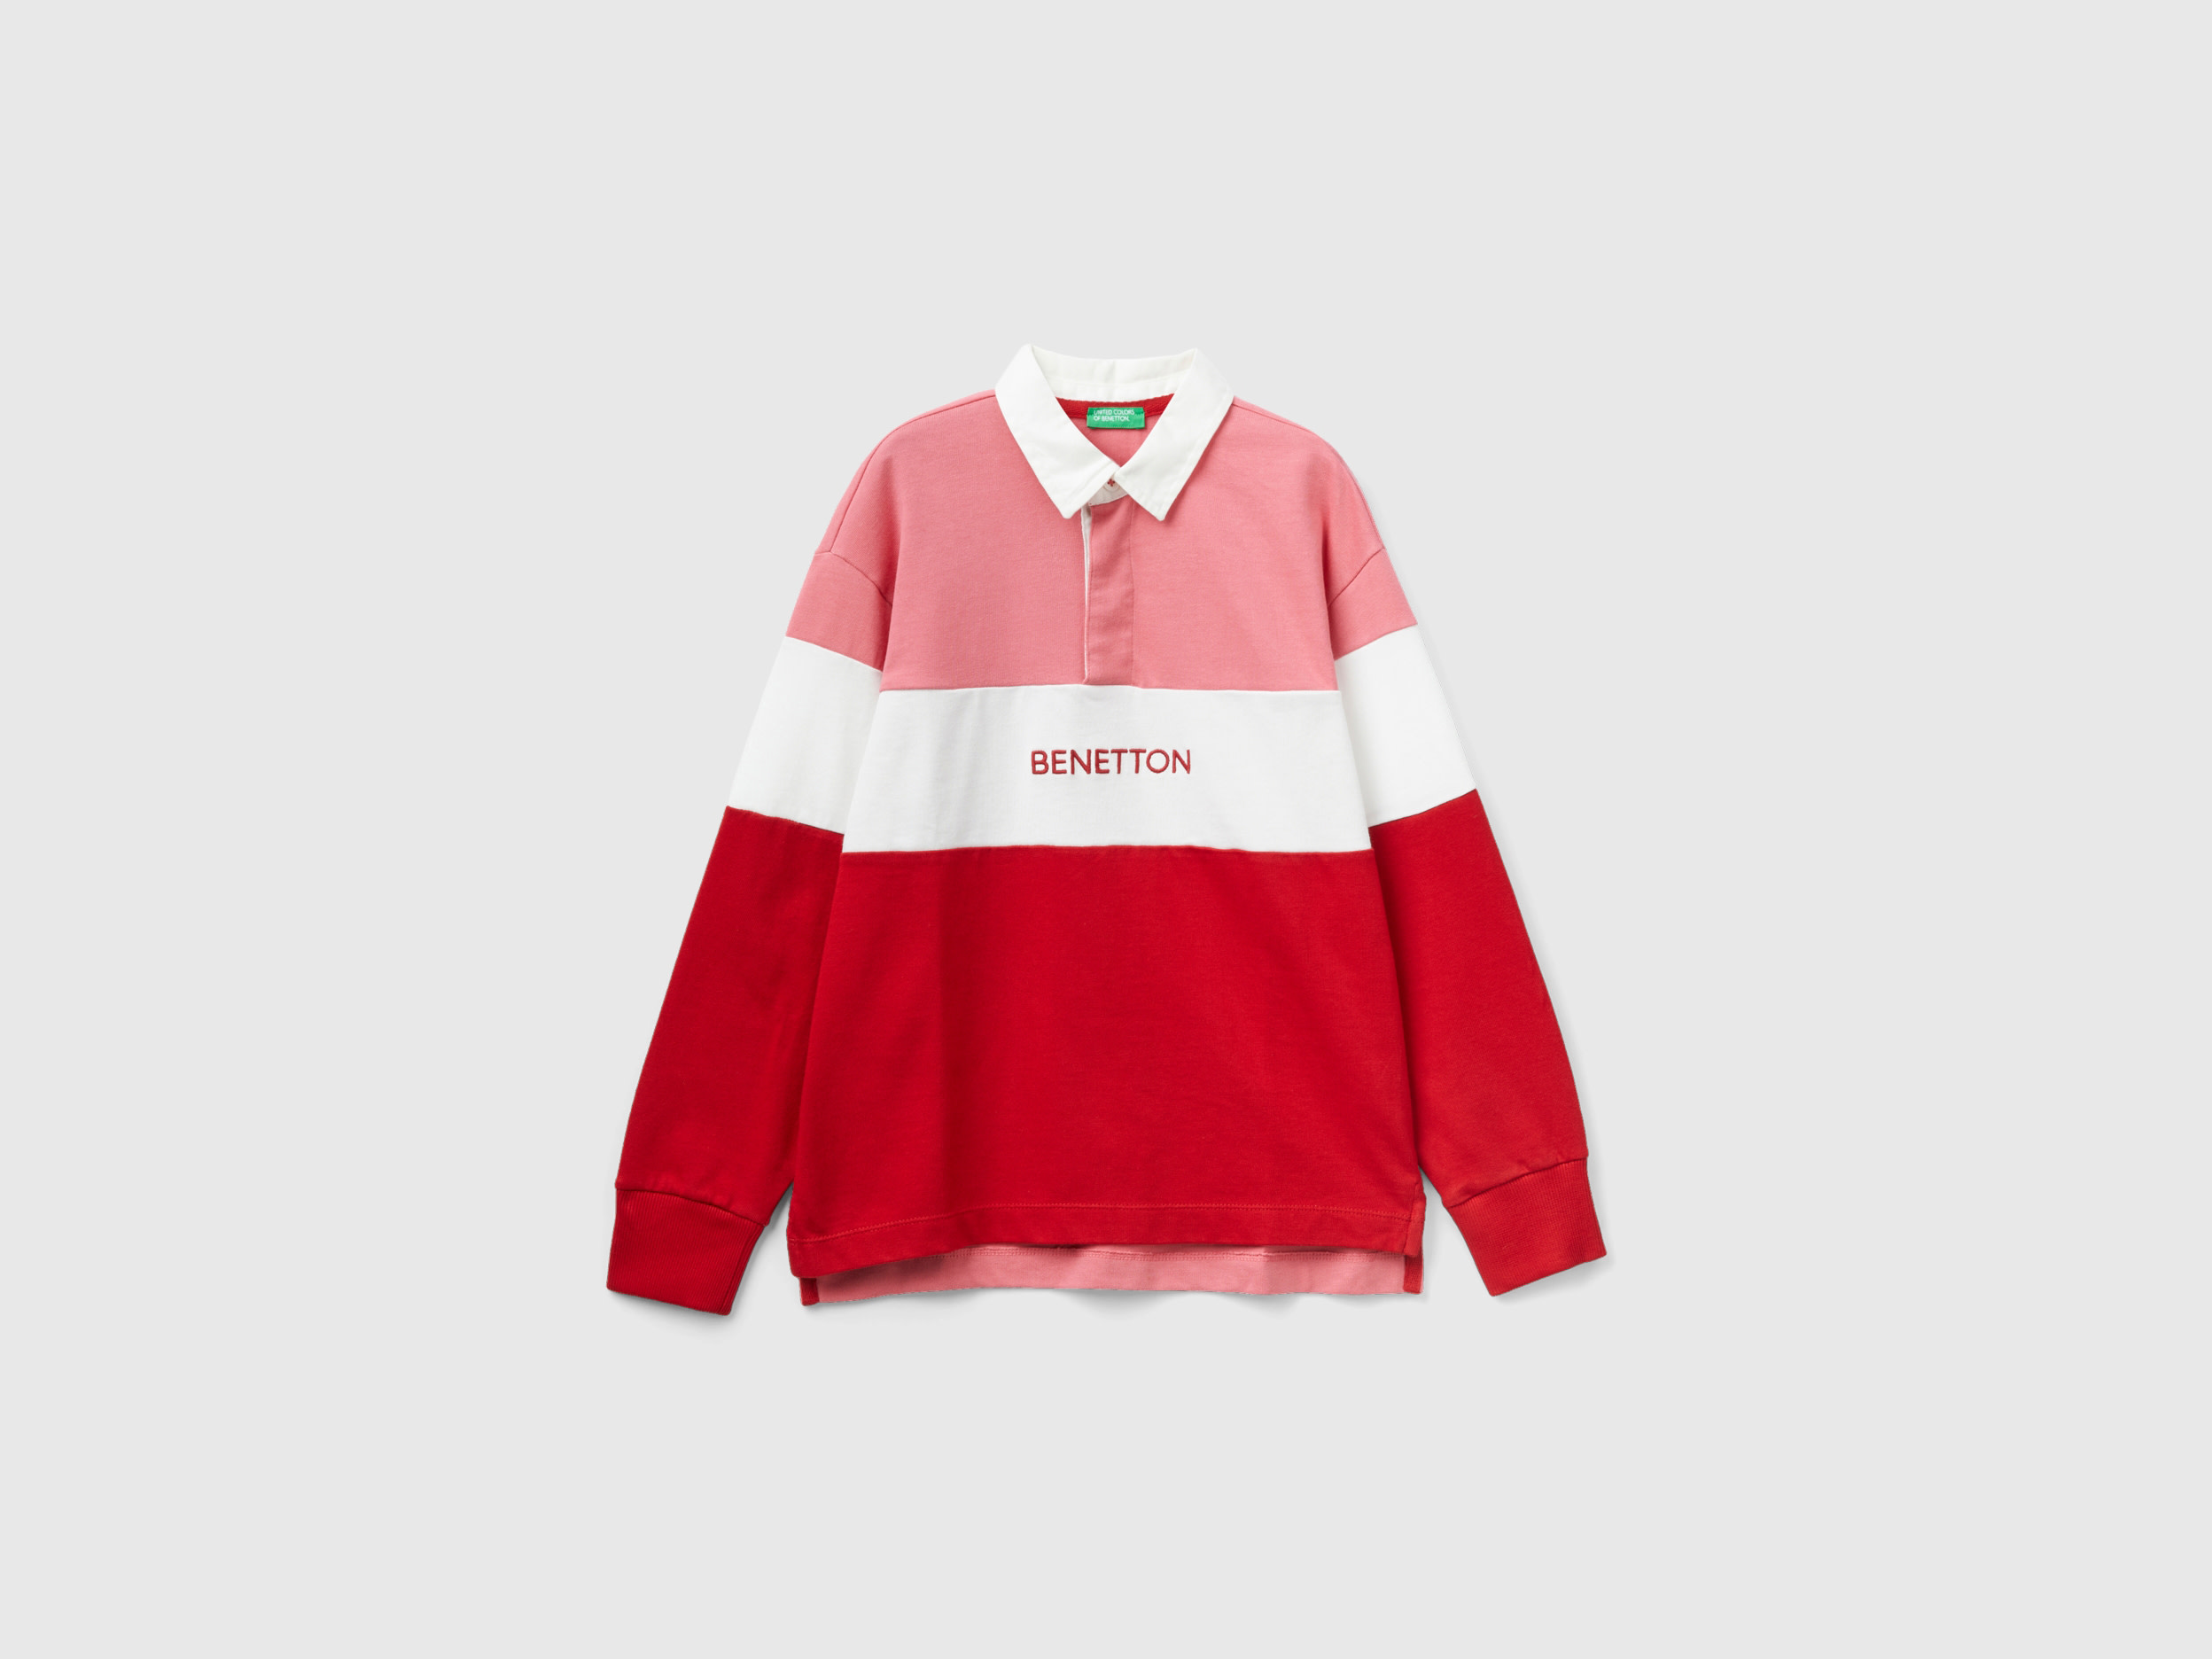 Benetton, Red And Pink Regular Fit Polo, size 3XL, Pink, Kids